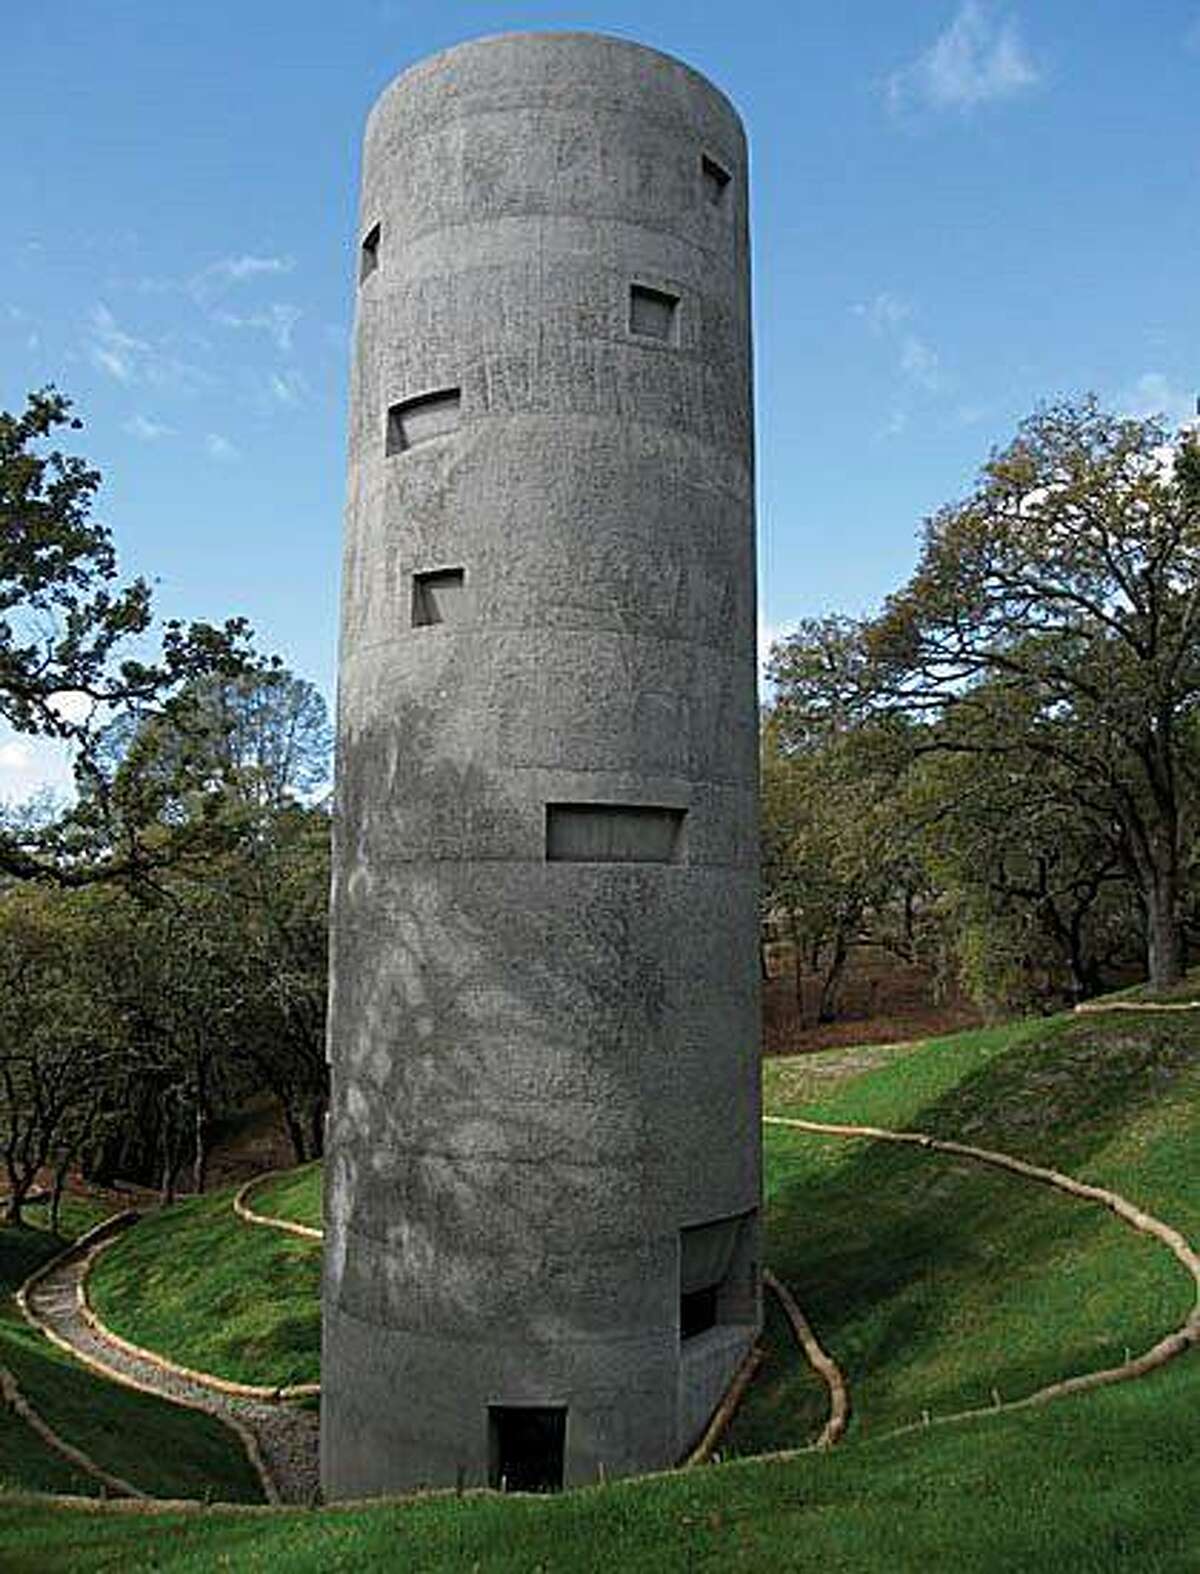 Photographer and artist Ann Hamilton's concrete tower for Steve Oliver's Sculpture ranch was built in collaboration with Jensen $ Macy Architeds. The concrete tower has no windows. A single door leads to a double helix stairway that rises toward the open roof — a spiritual light —and a viewing gallery up top.